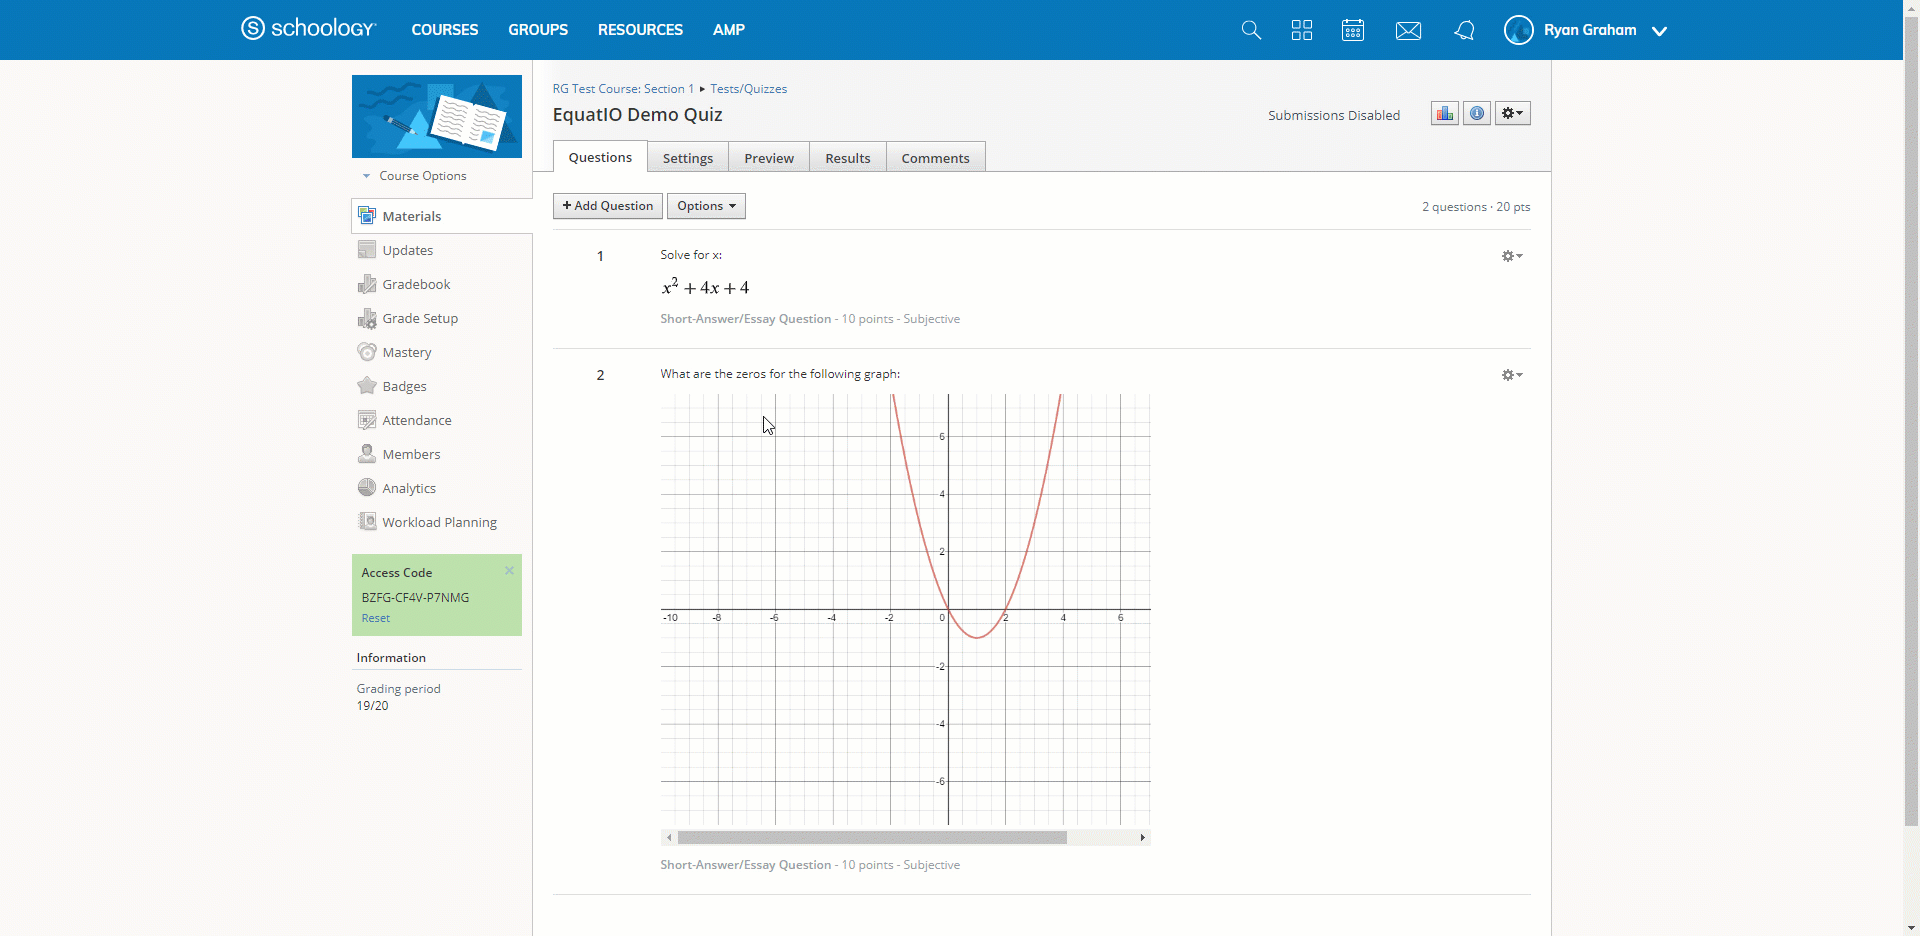 GIF of EquatIO for LMS in Schoology